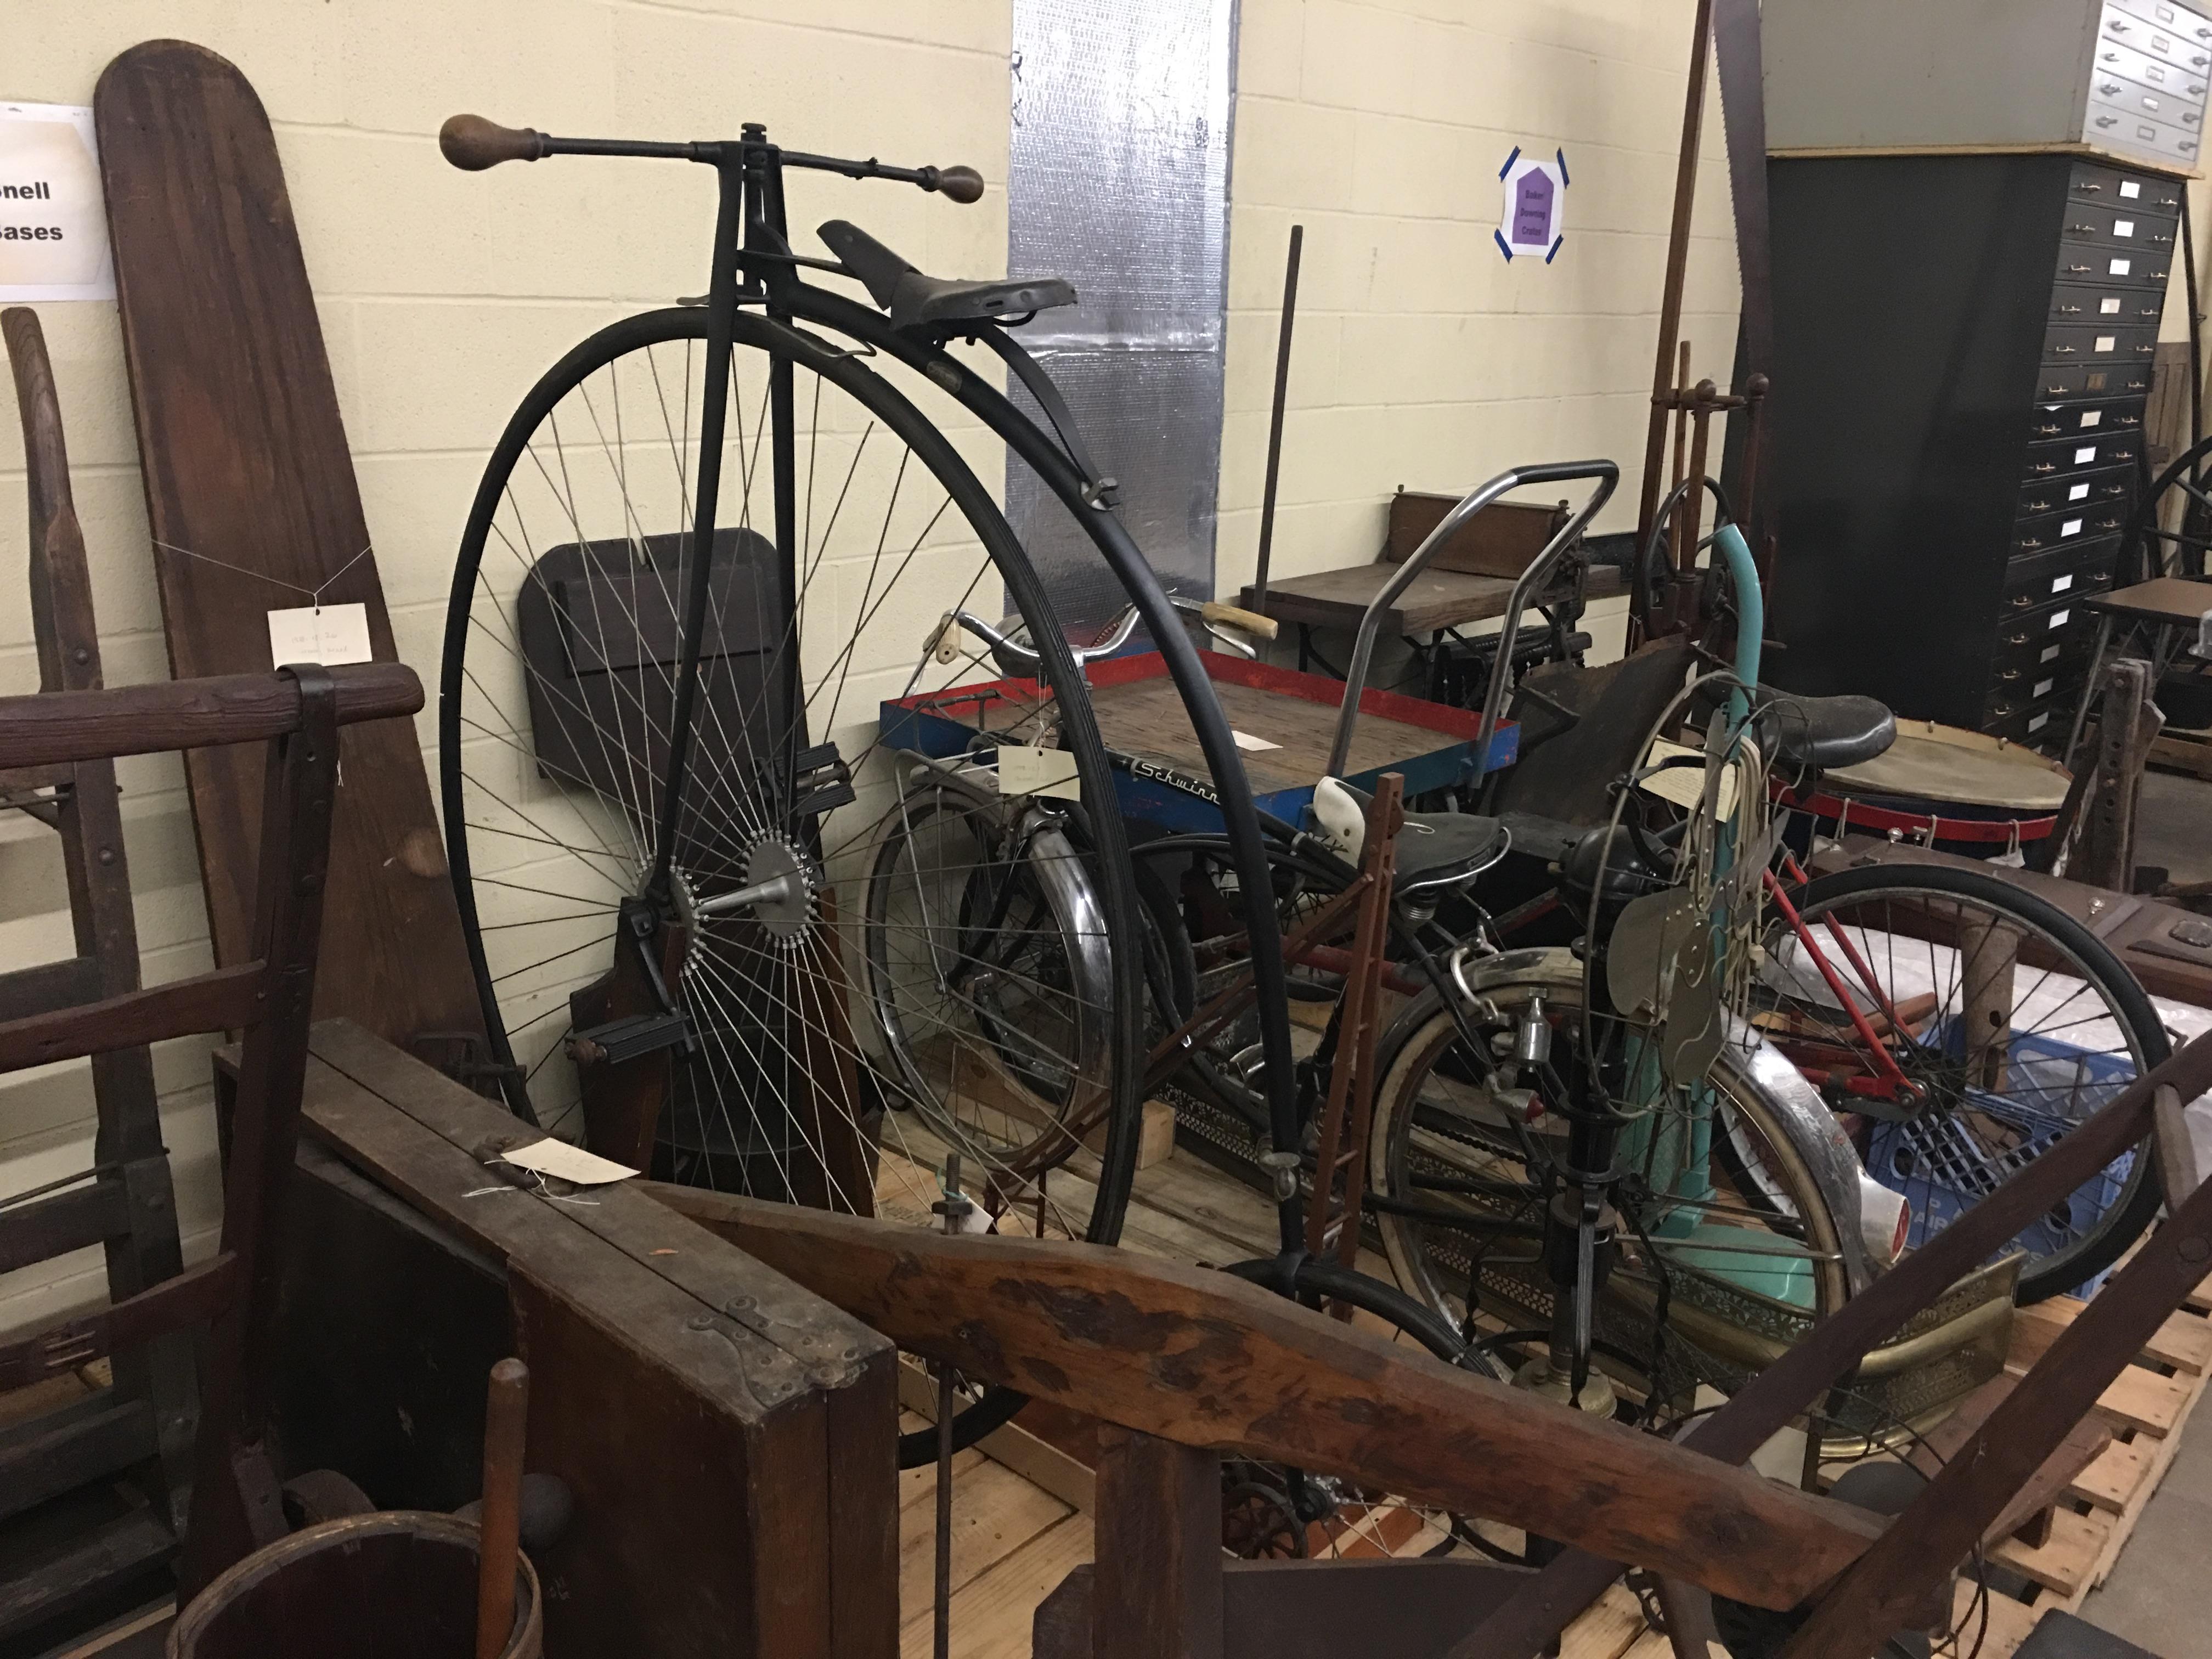 Victorian bicycle is just one of many interesting artifacts 